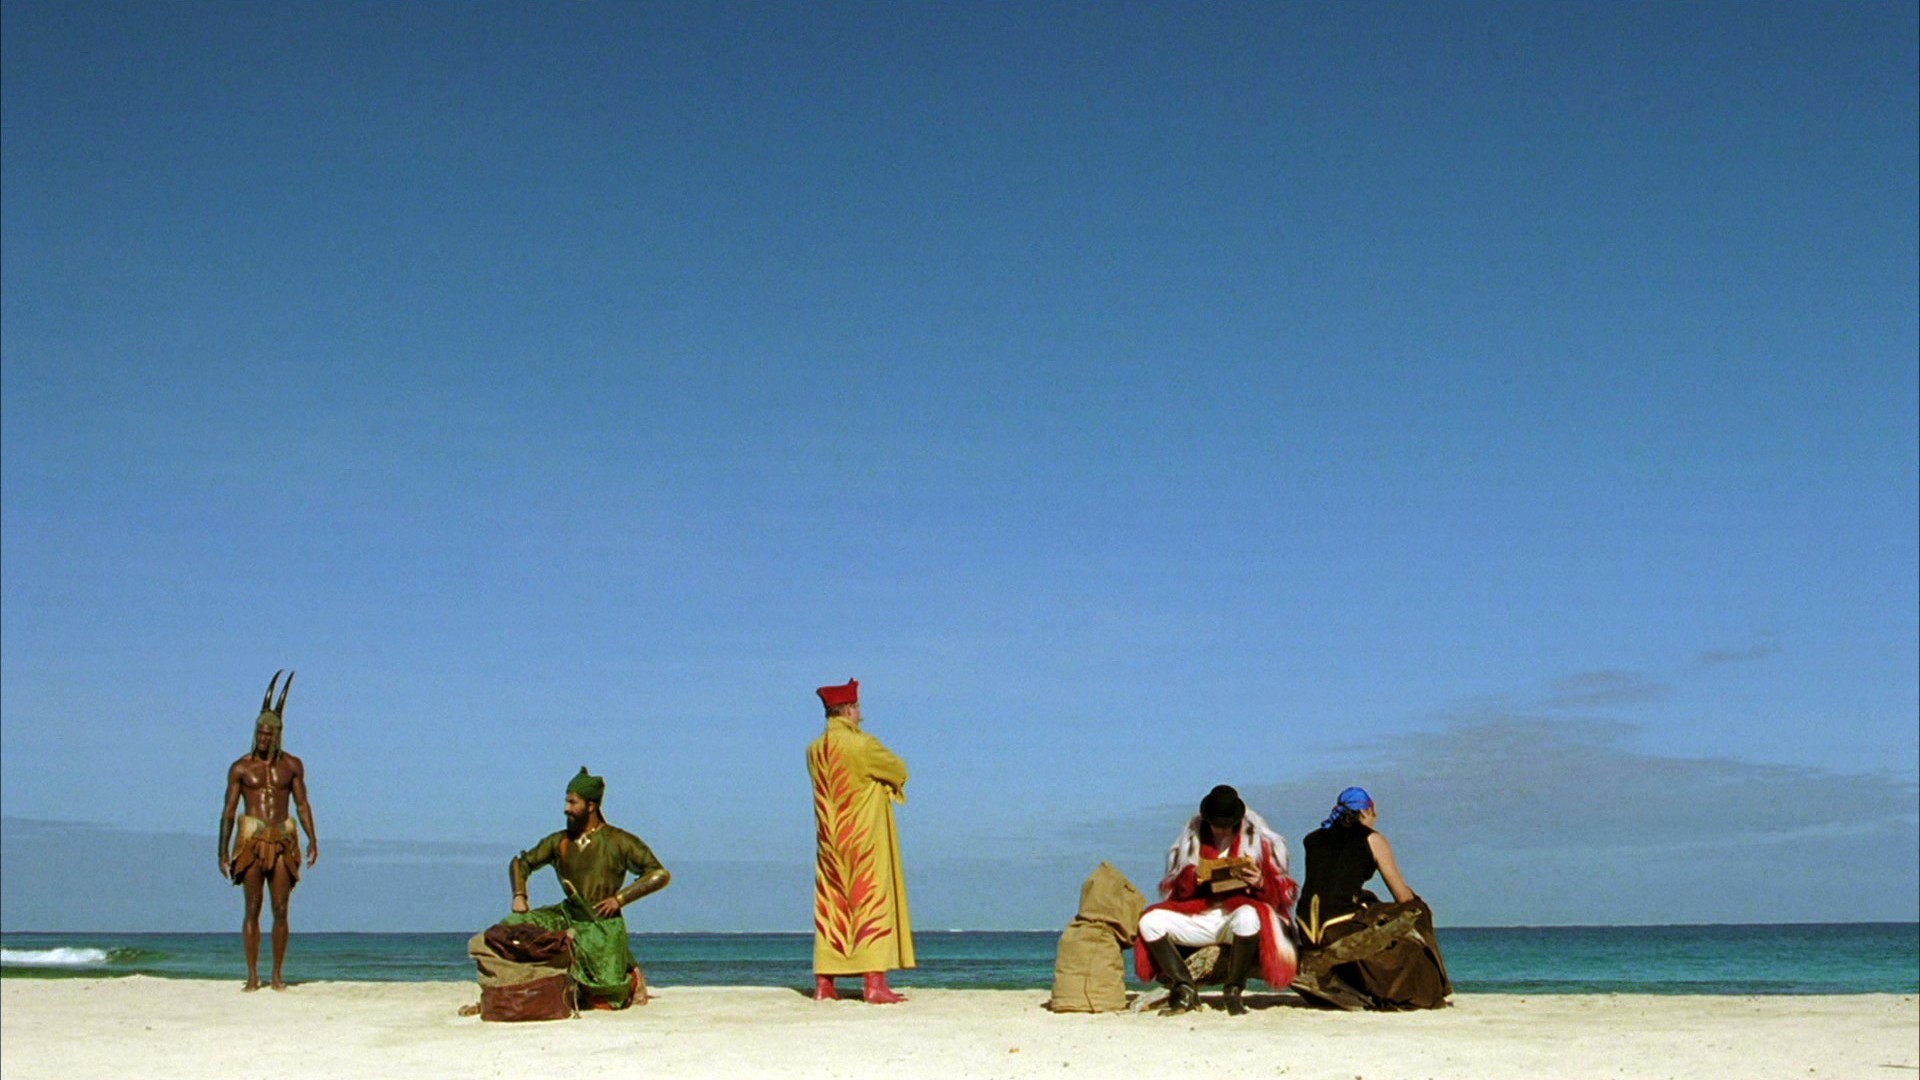 1920x1080 The Fall (2006) Tarsem Singh - the unlikely heroes band together in a quest